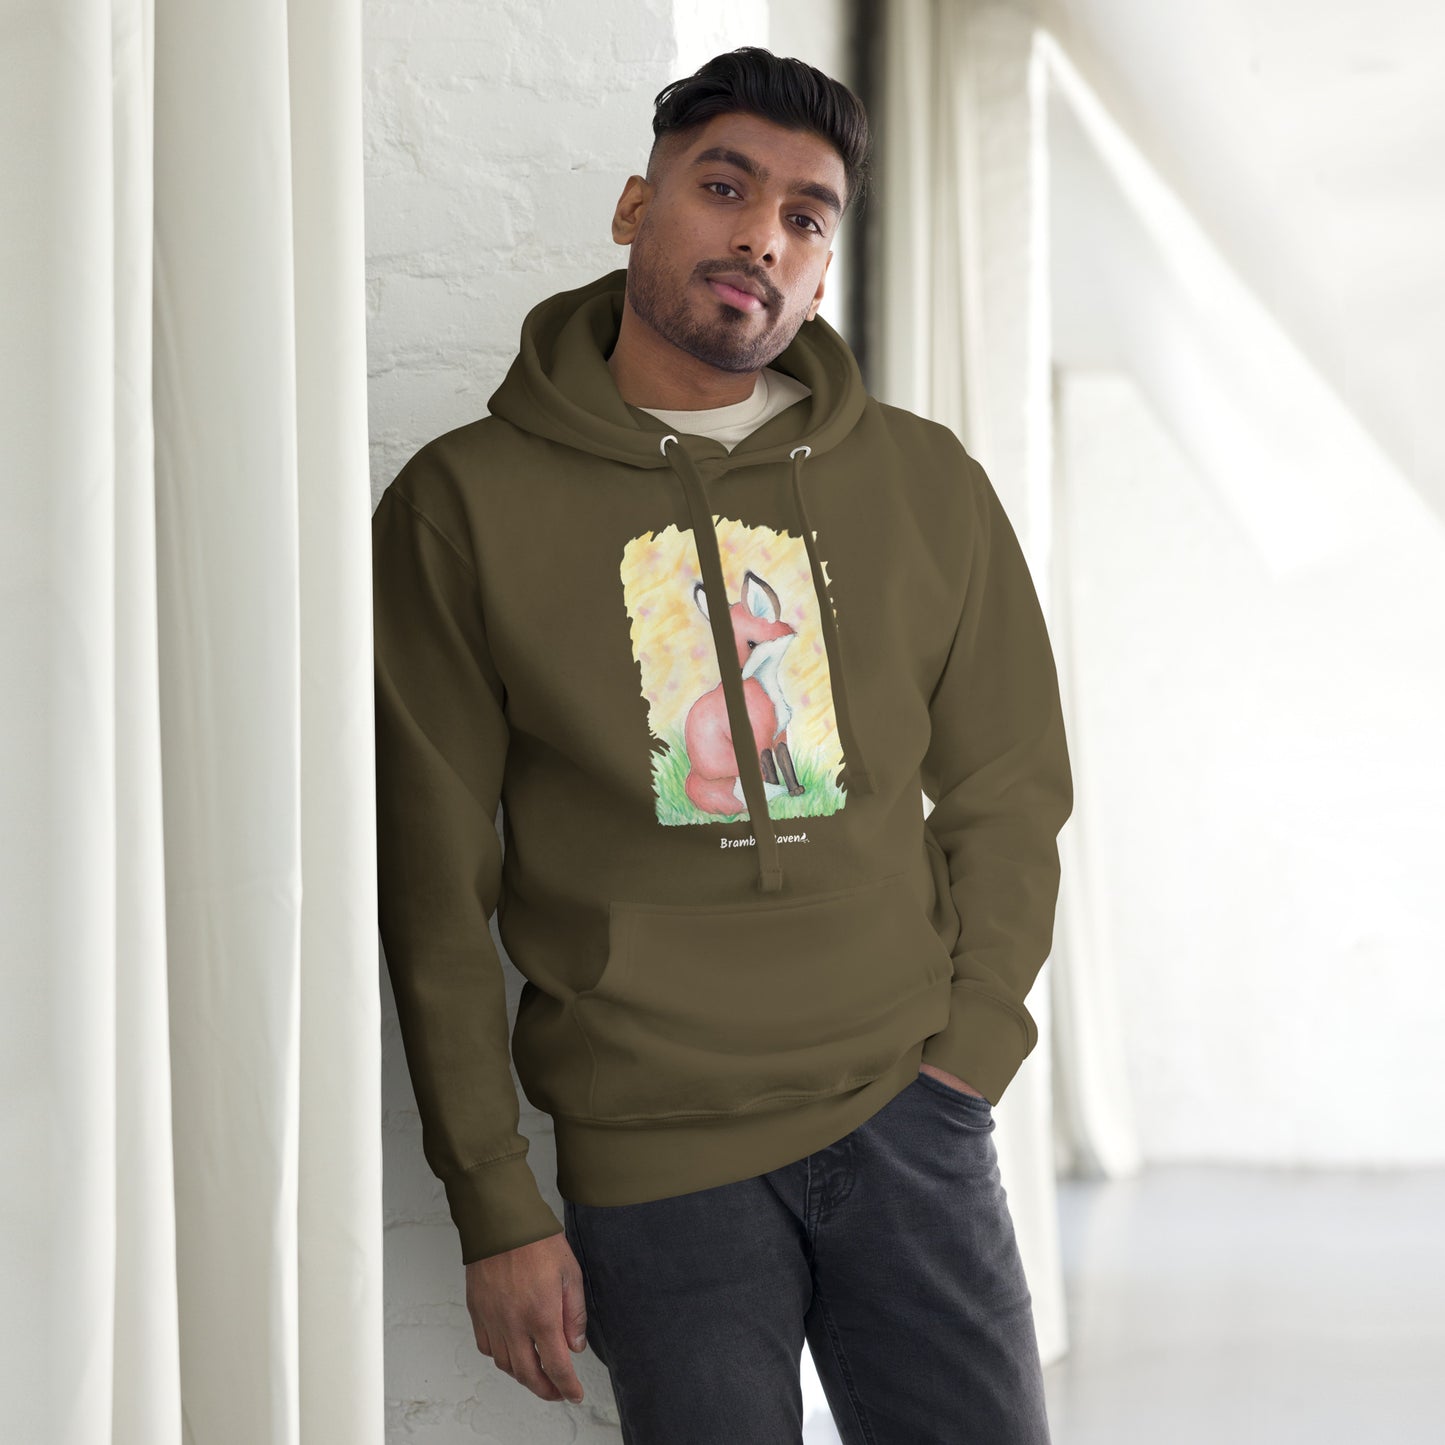 Unisex military green colored hoodie. Features original watercolor painting of a fox in the grass against a yellow backdrop. Shown on male model.